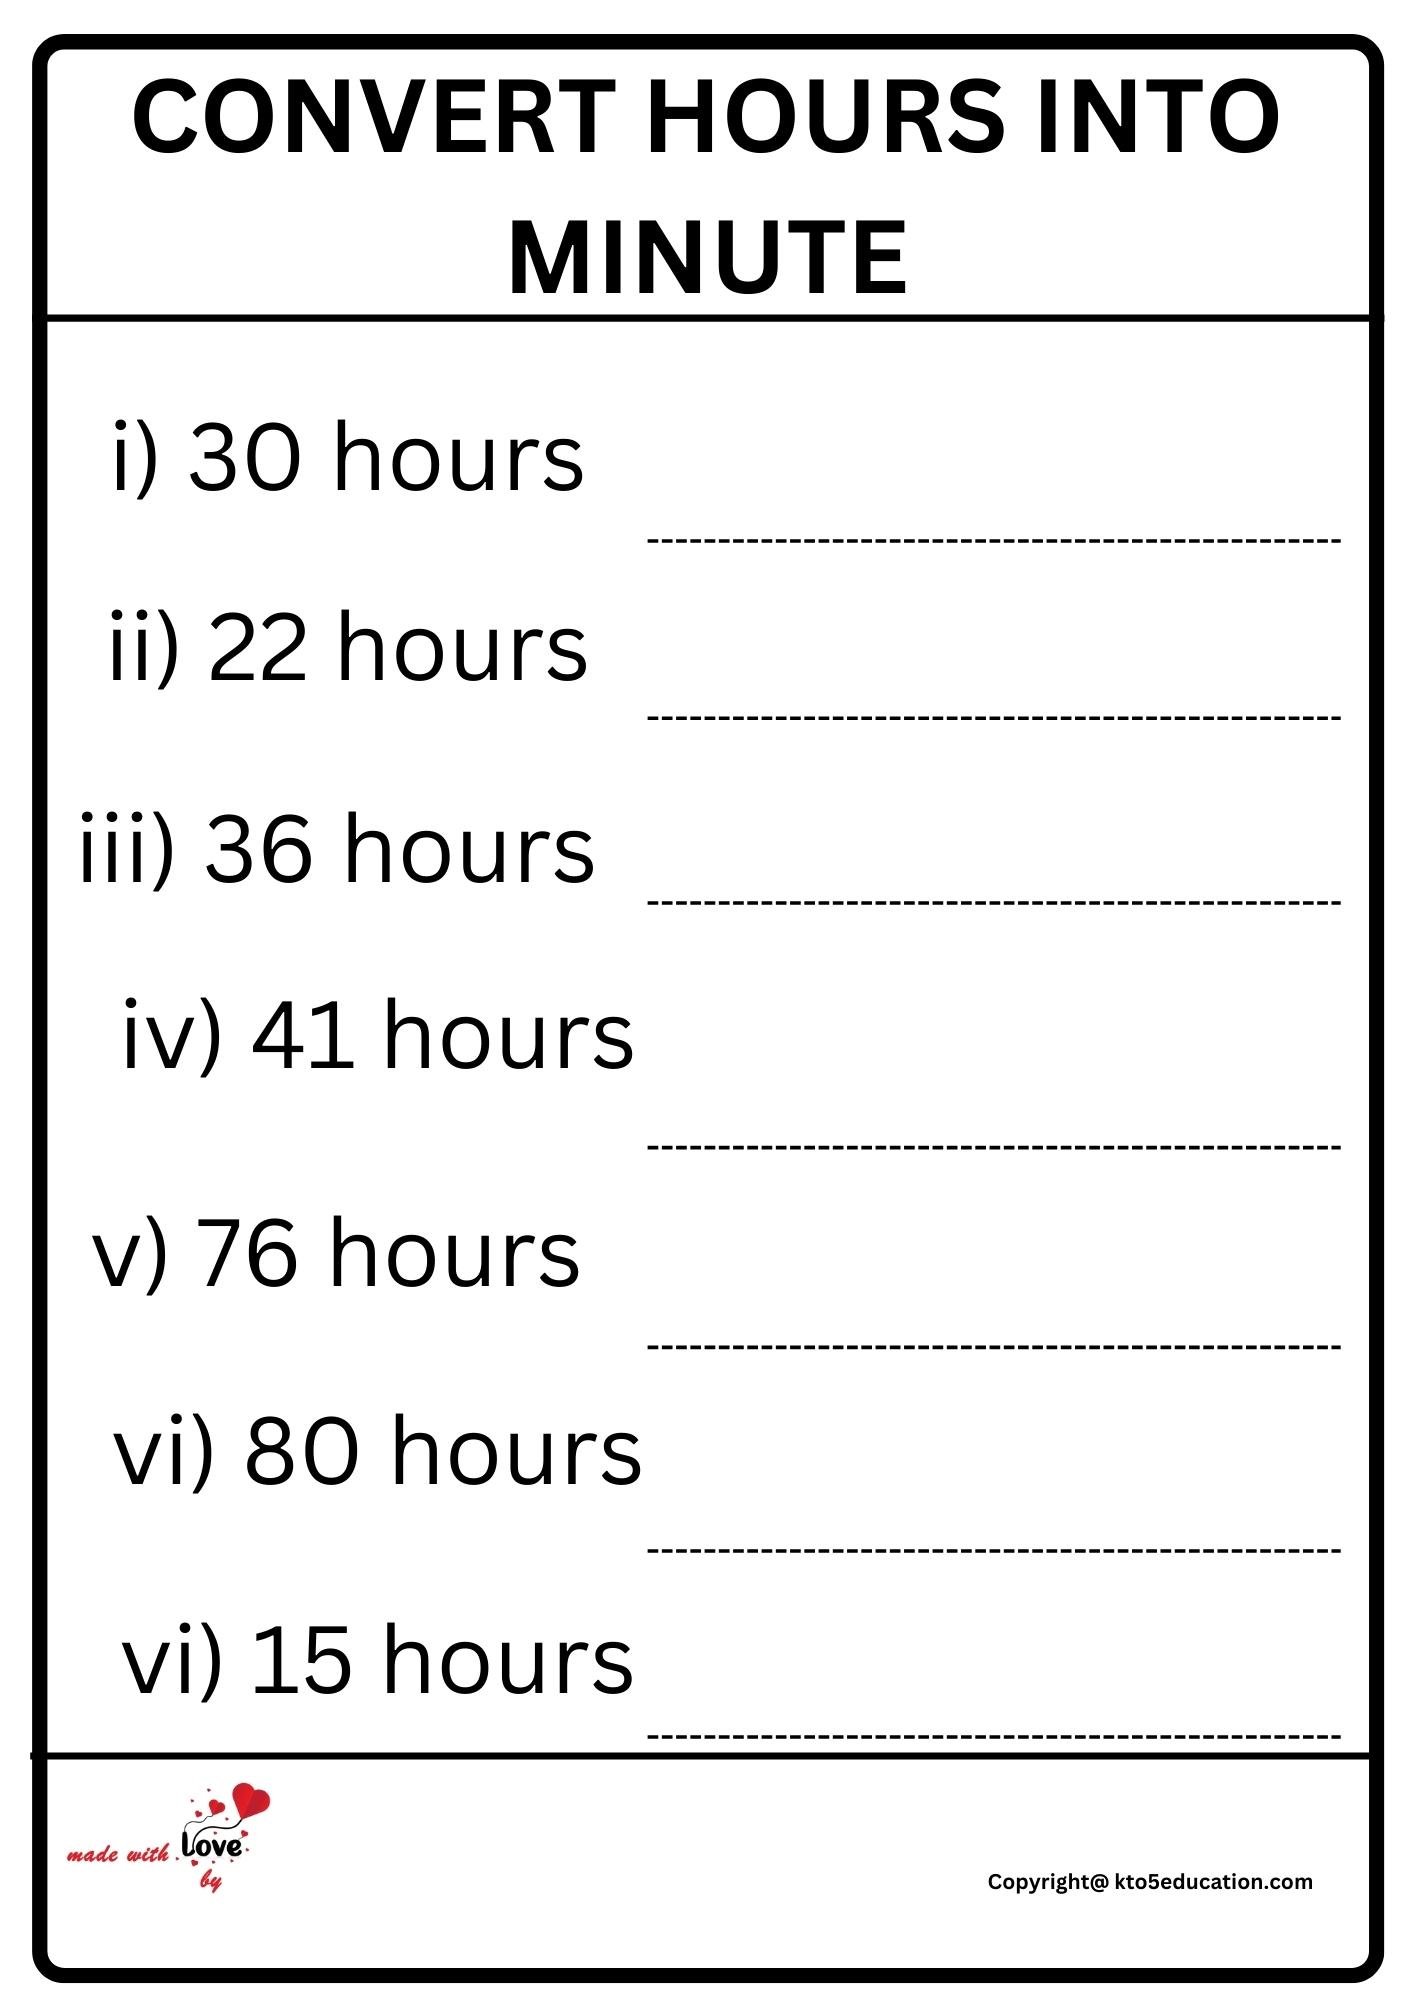 Convert Hours Into Minute Worksheet